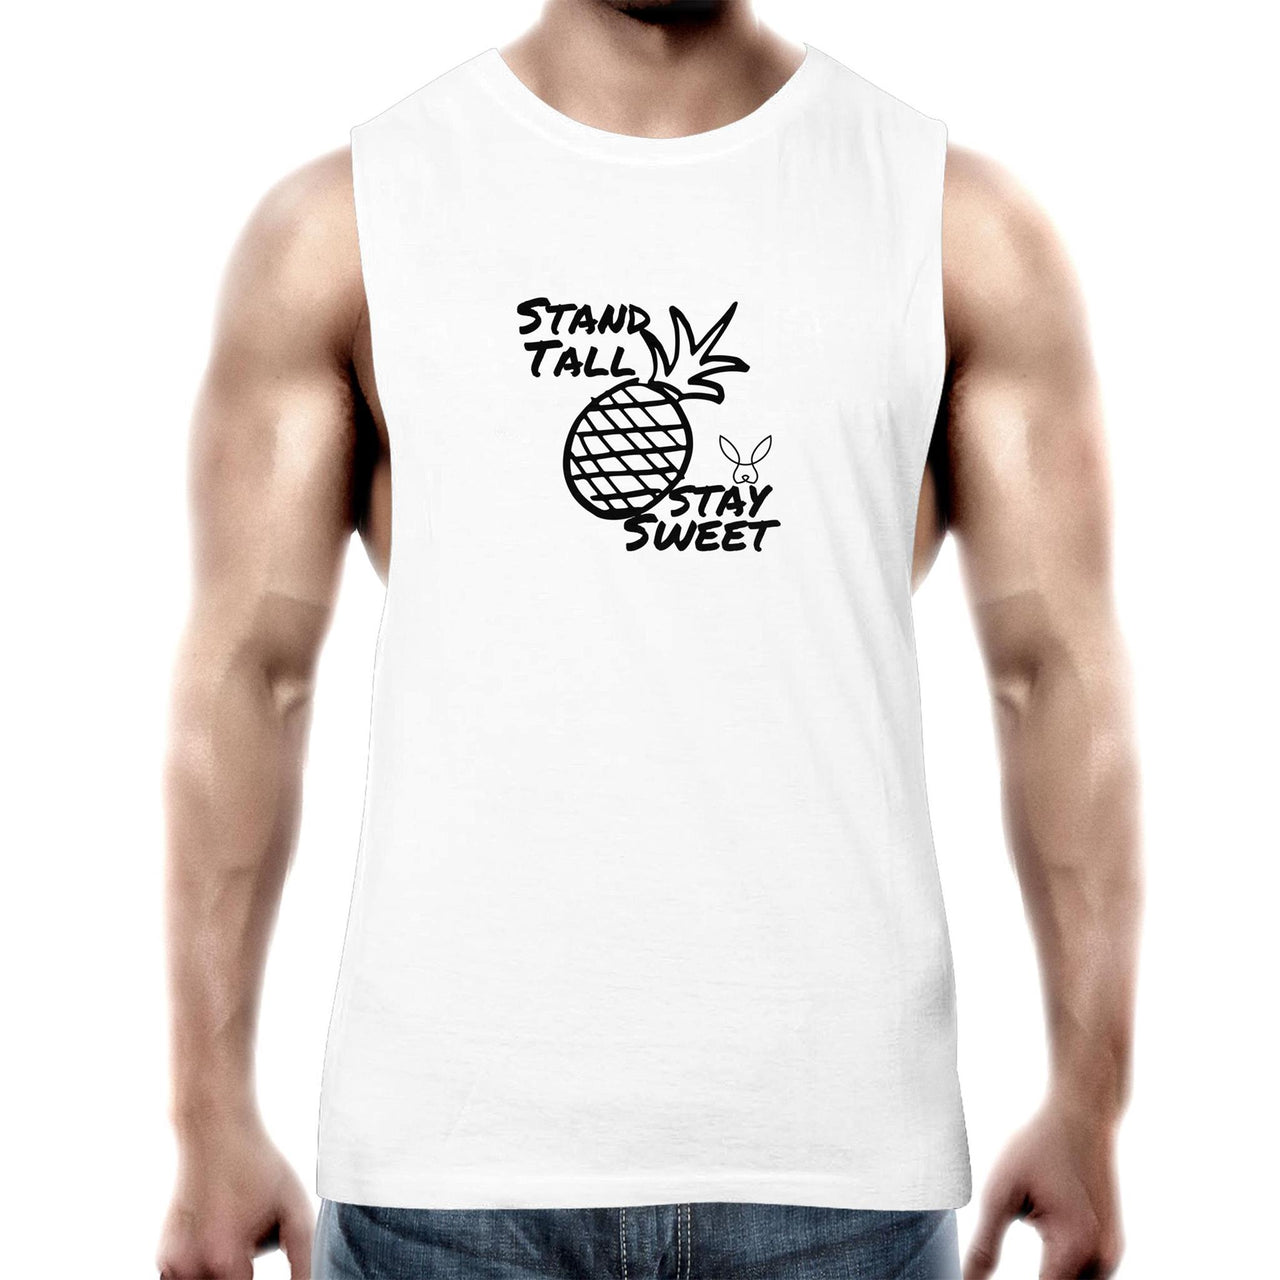 Stand Tall Tank Top Tee by CBF Clothing in White